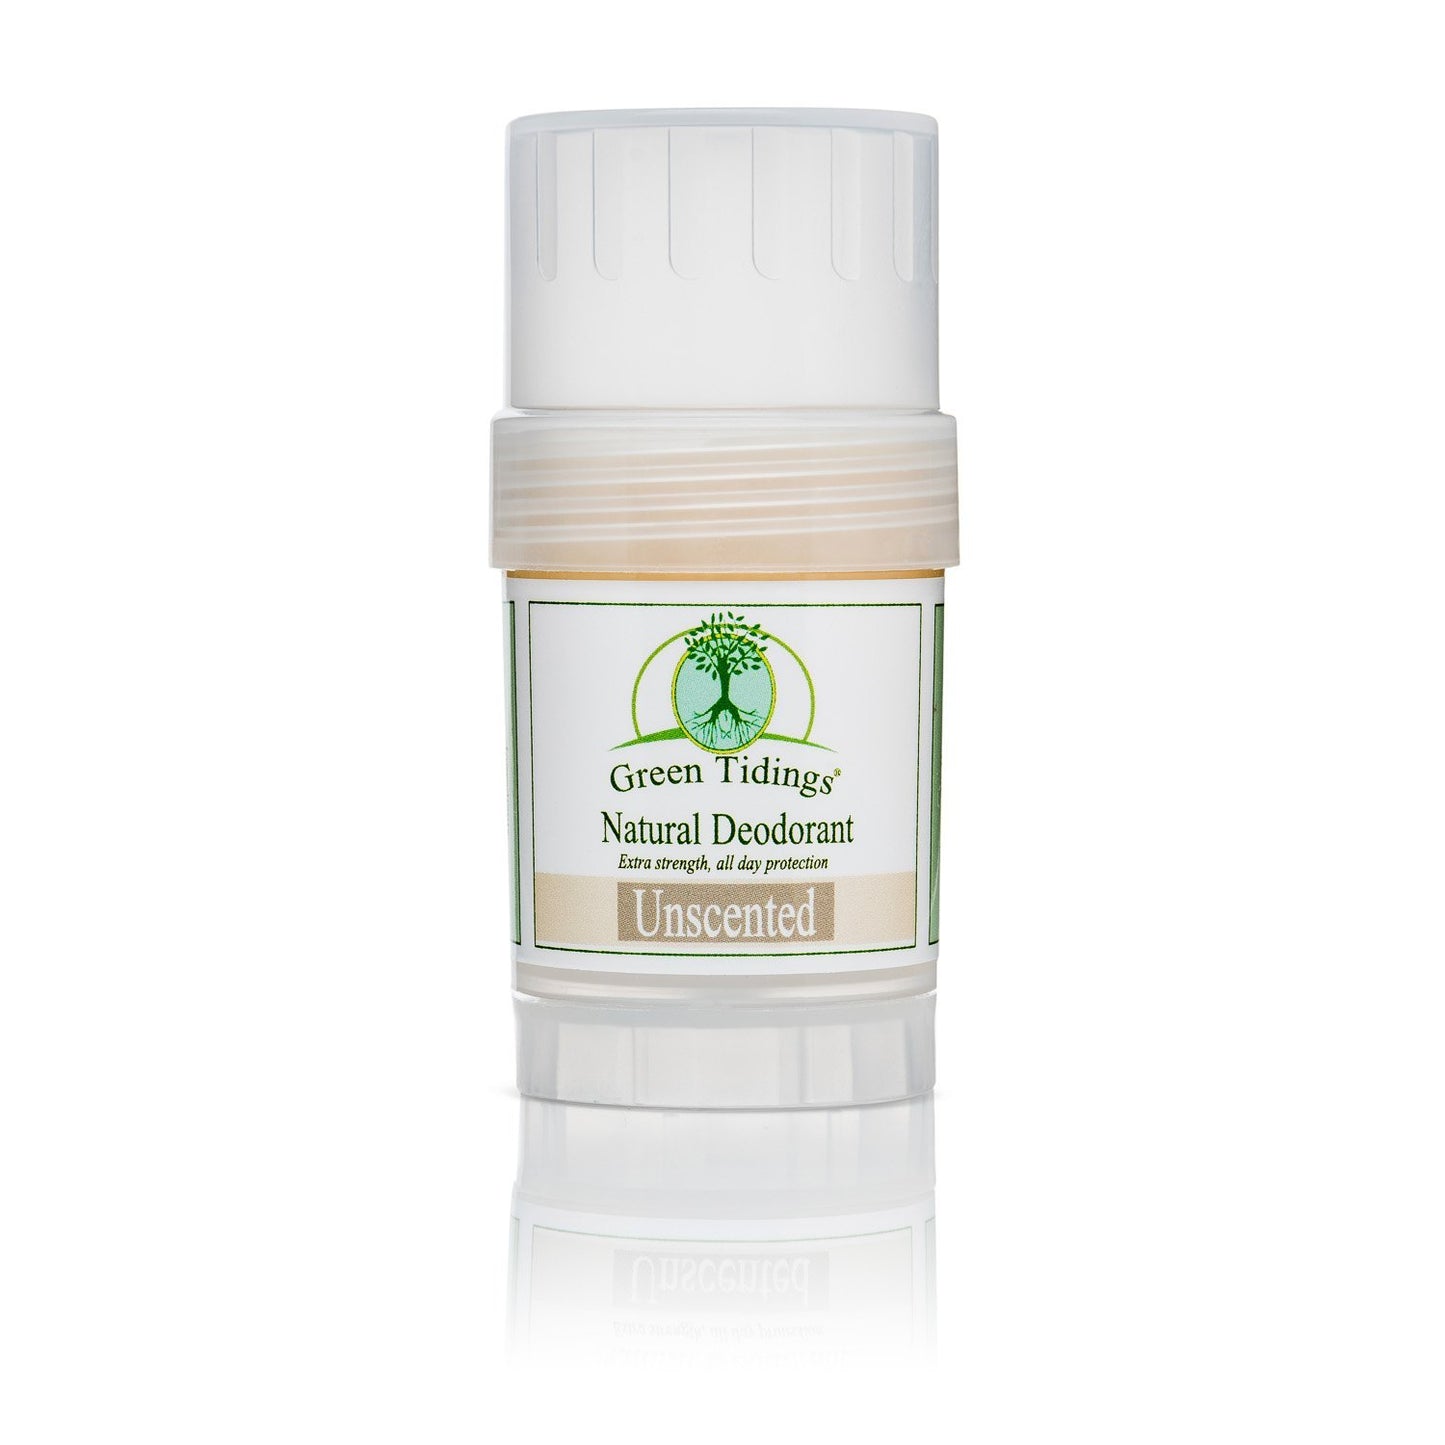 Green Tidings Natural Deodorant, Unscented 1 Ounce - Green Tidings